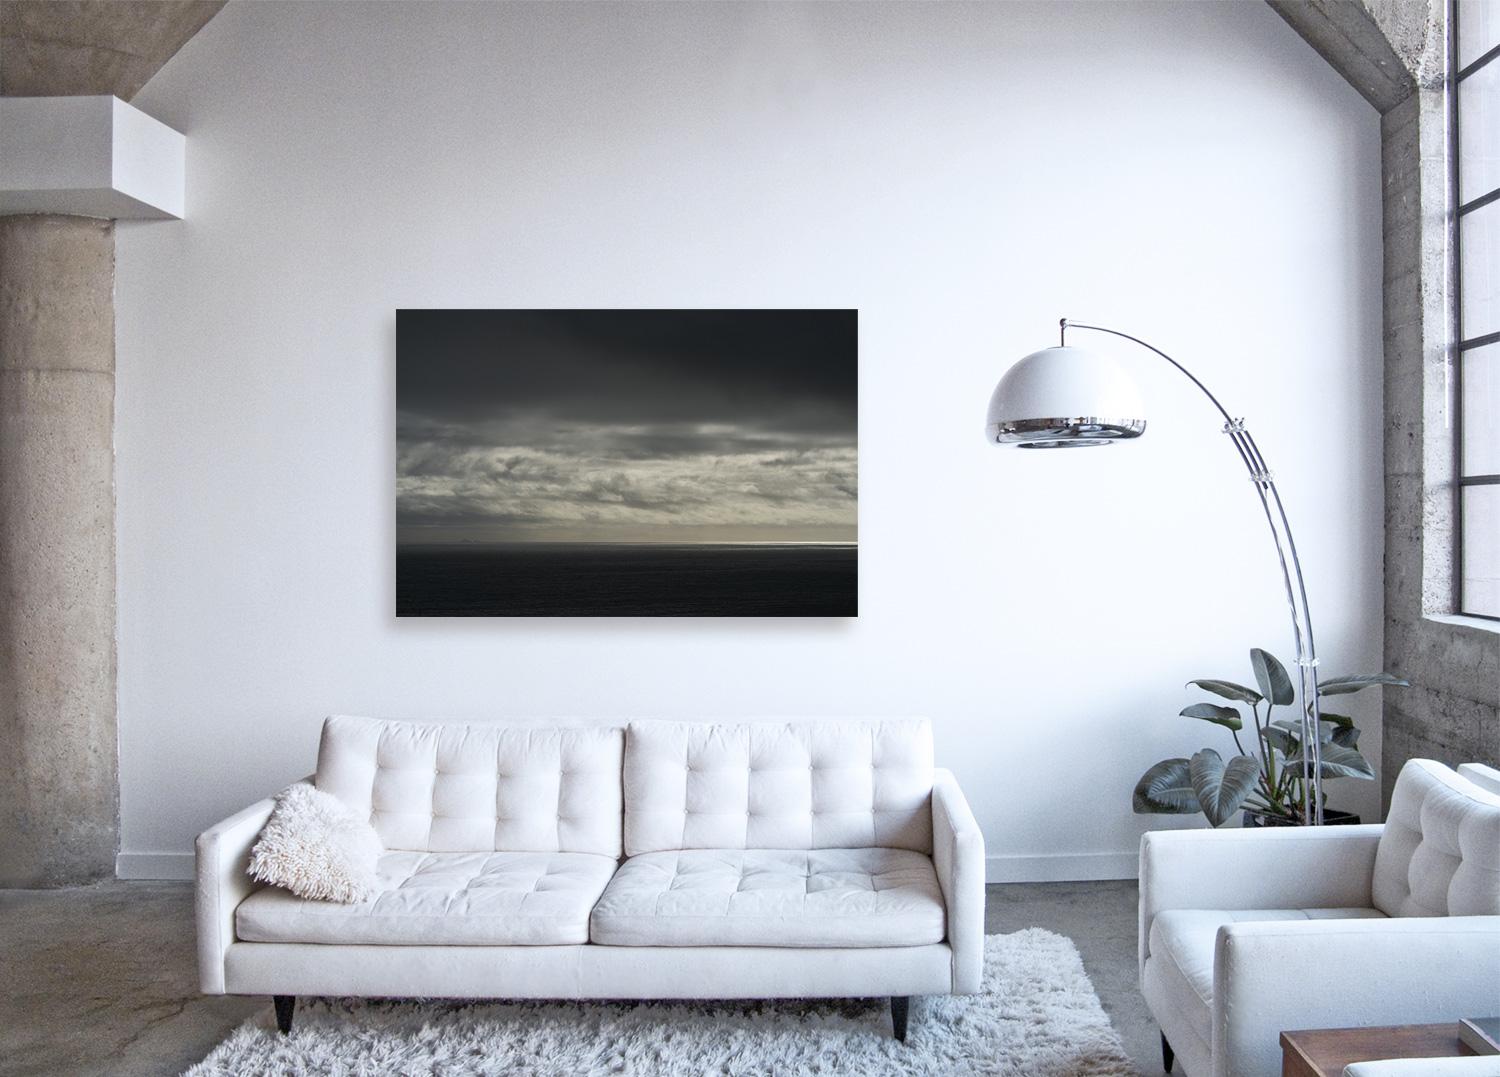 Cloud Study IV - large scale photograph of dramatic momochromatic cloudscape sky - Contemporary Print by Frank Schott